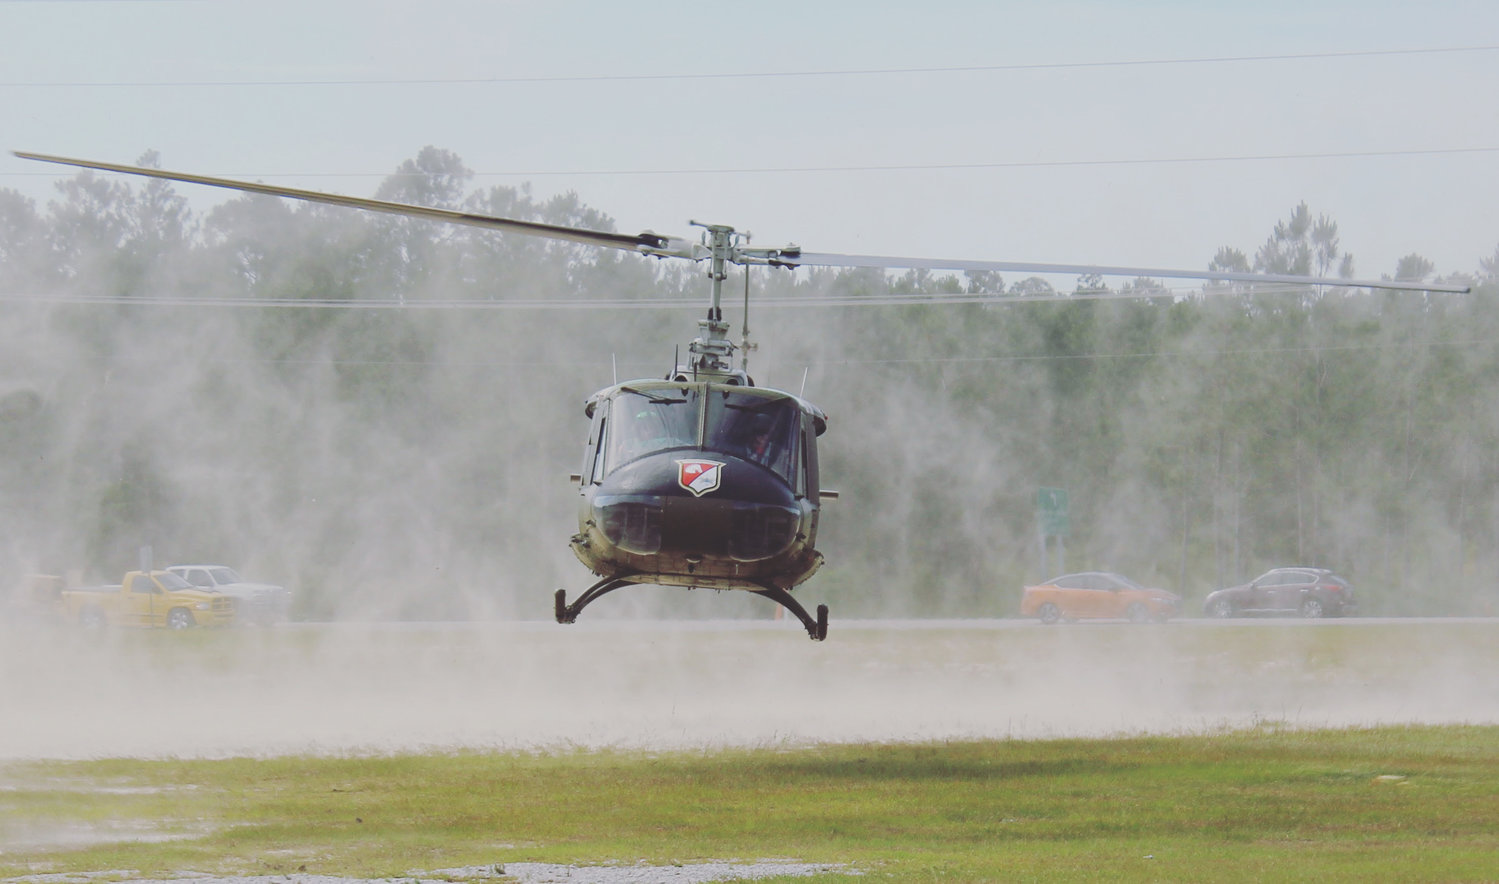 A Vietnam-era "Huey" lands at the helipad at The Wharf. The Friends of Army Aviation will offer flights in the multipurpose utility helicopter.